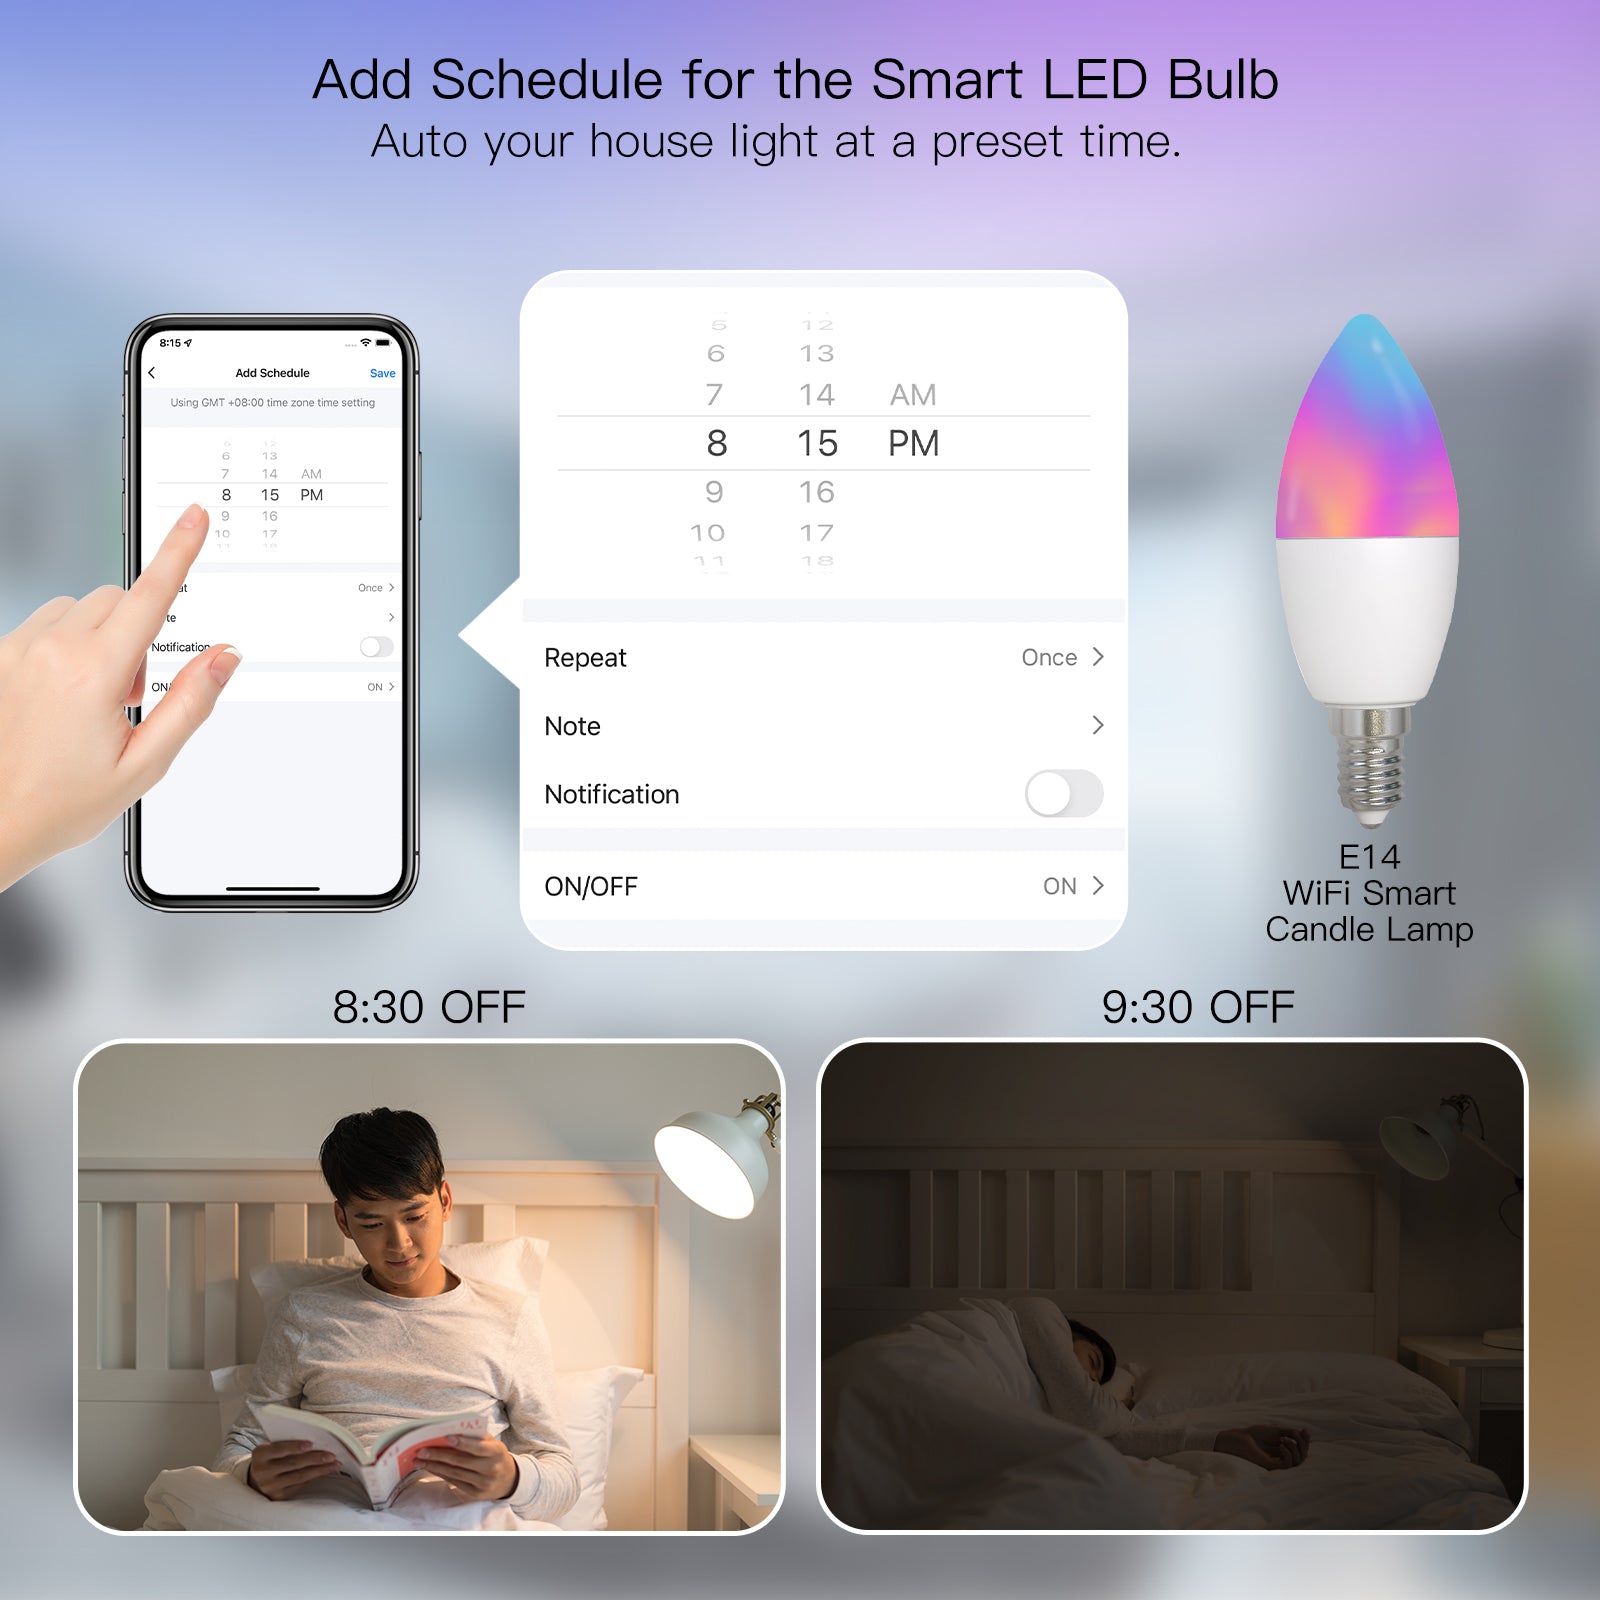 Add Schedule for the Smart L ED Bulb